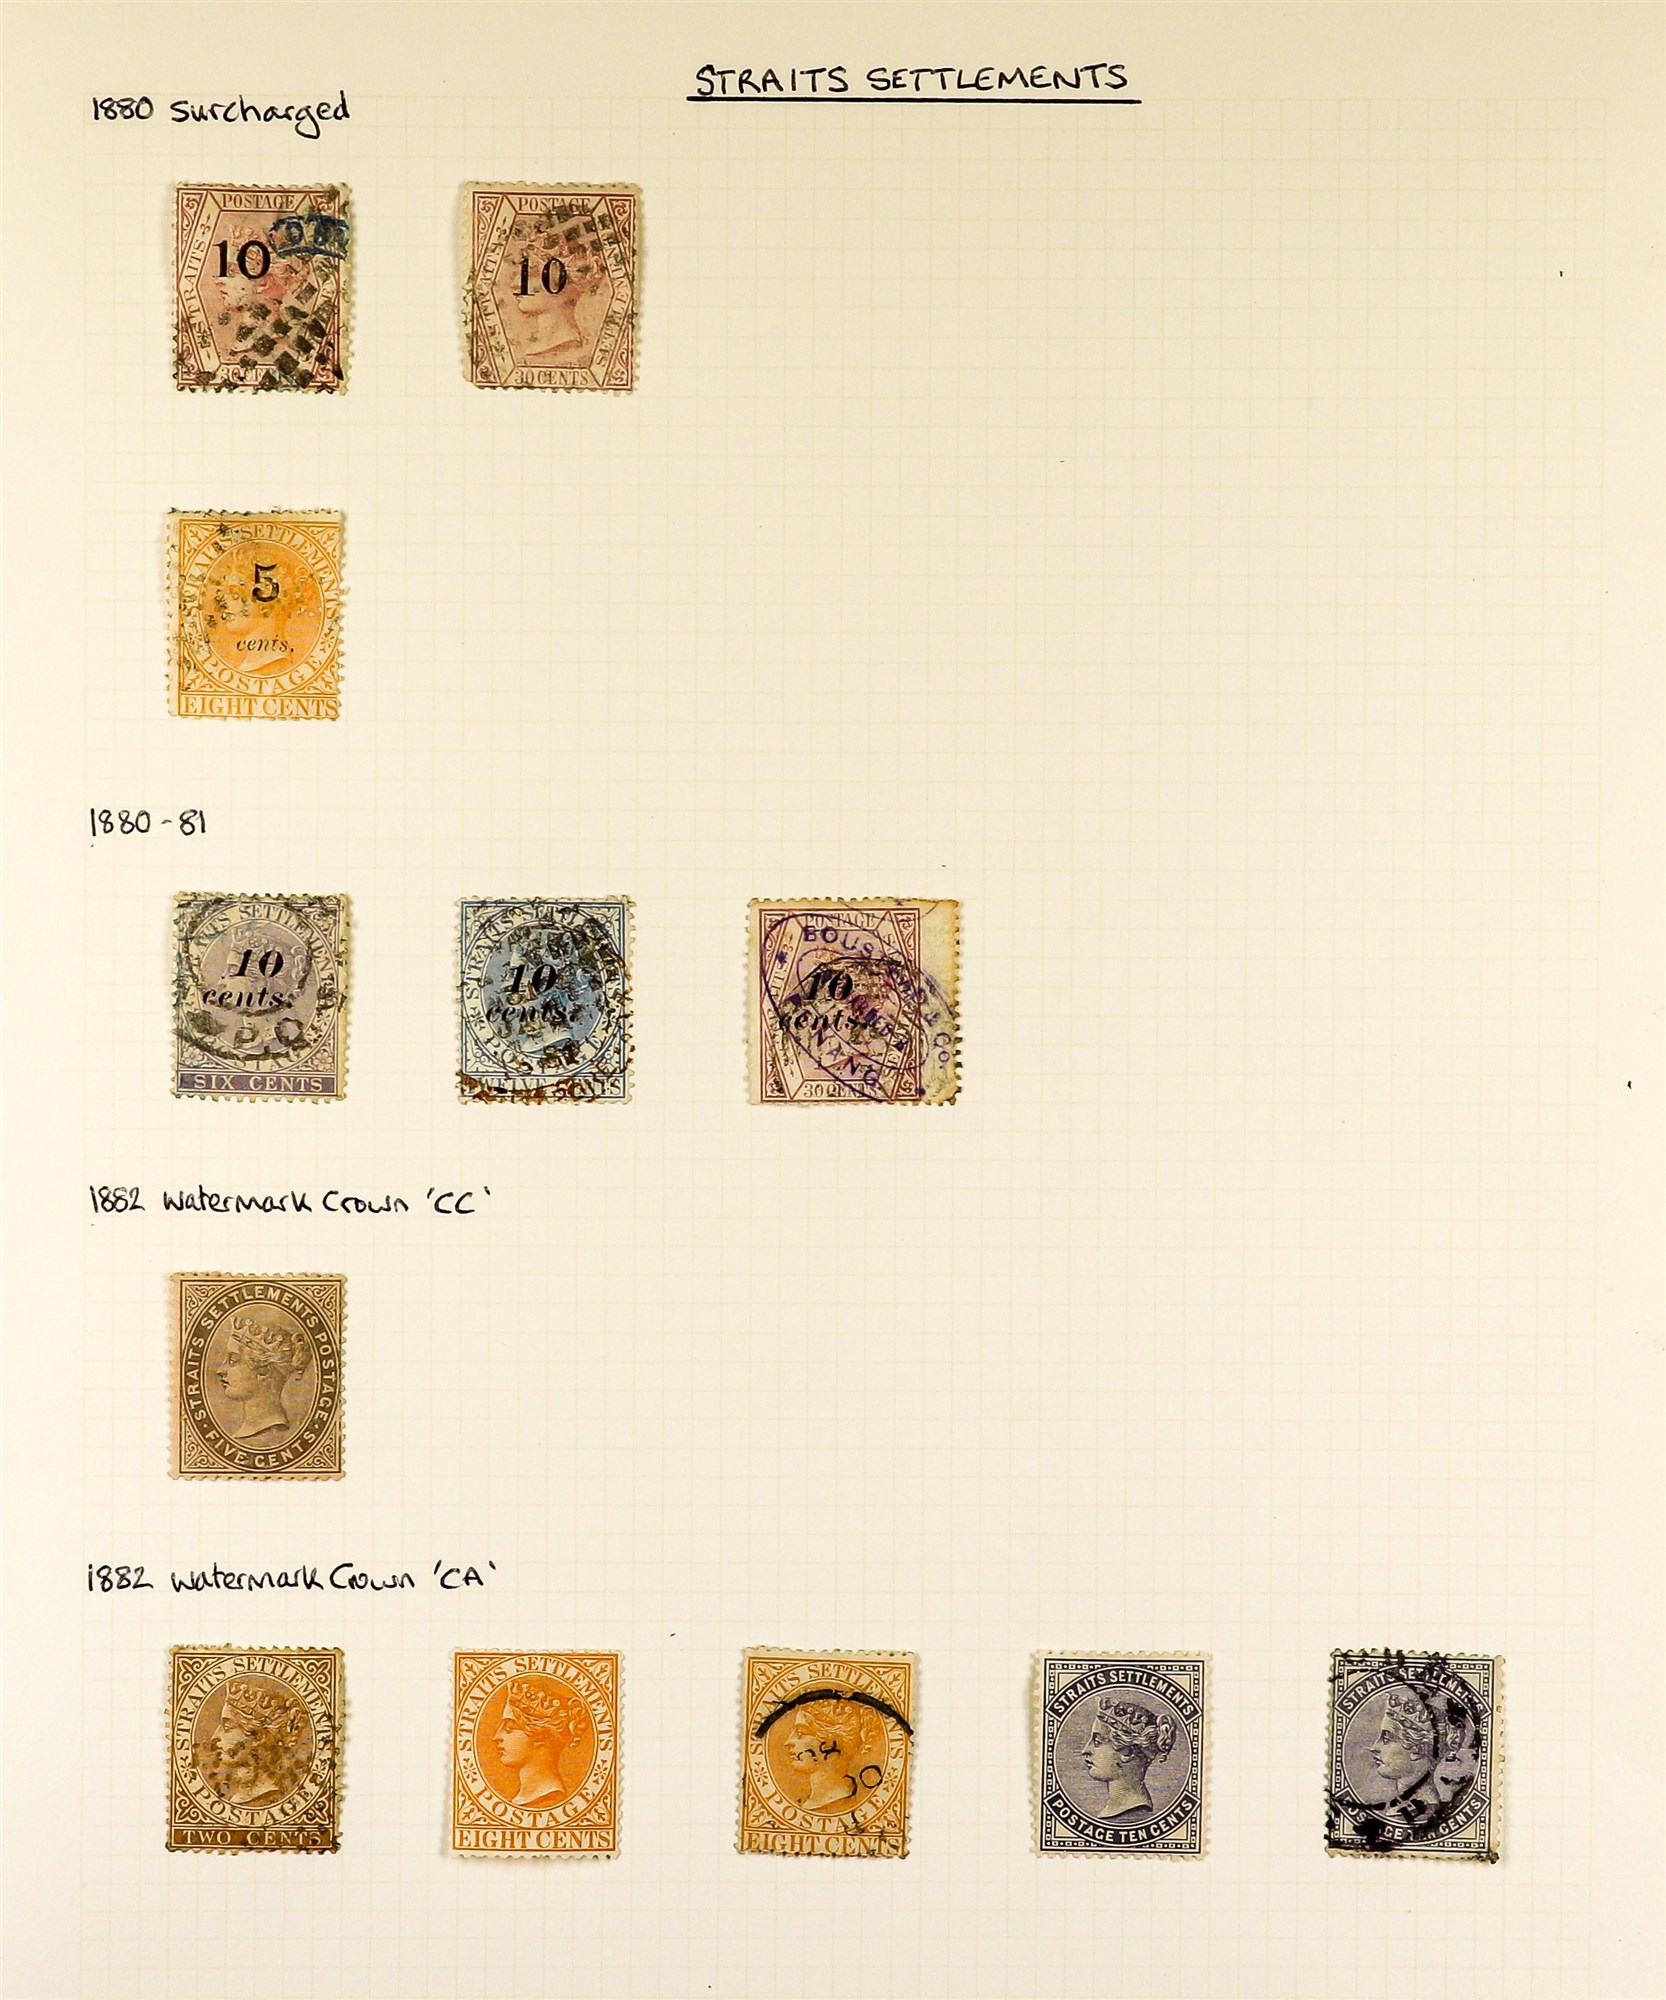 MALAYA-STRAITS SETT. 1867 - 1899 COLLECTION of over 100 chiefly used 19th Century stamps on album - Image 2 of 6